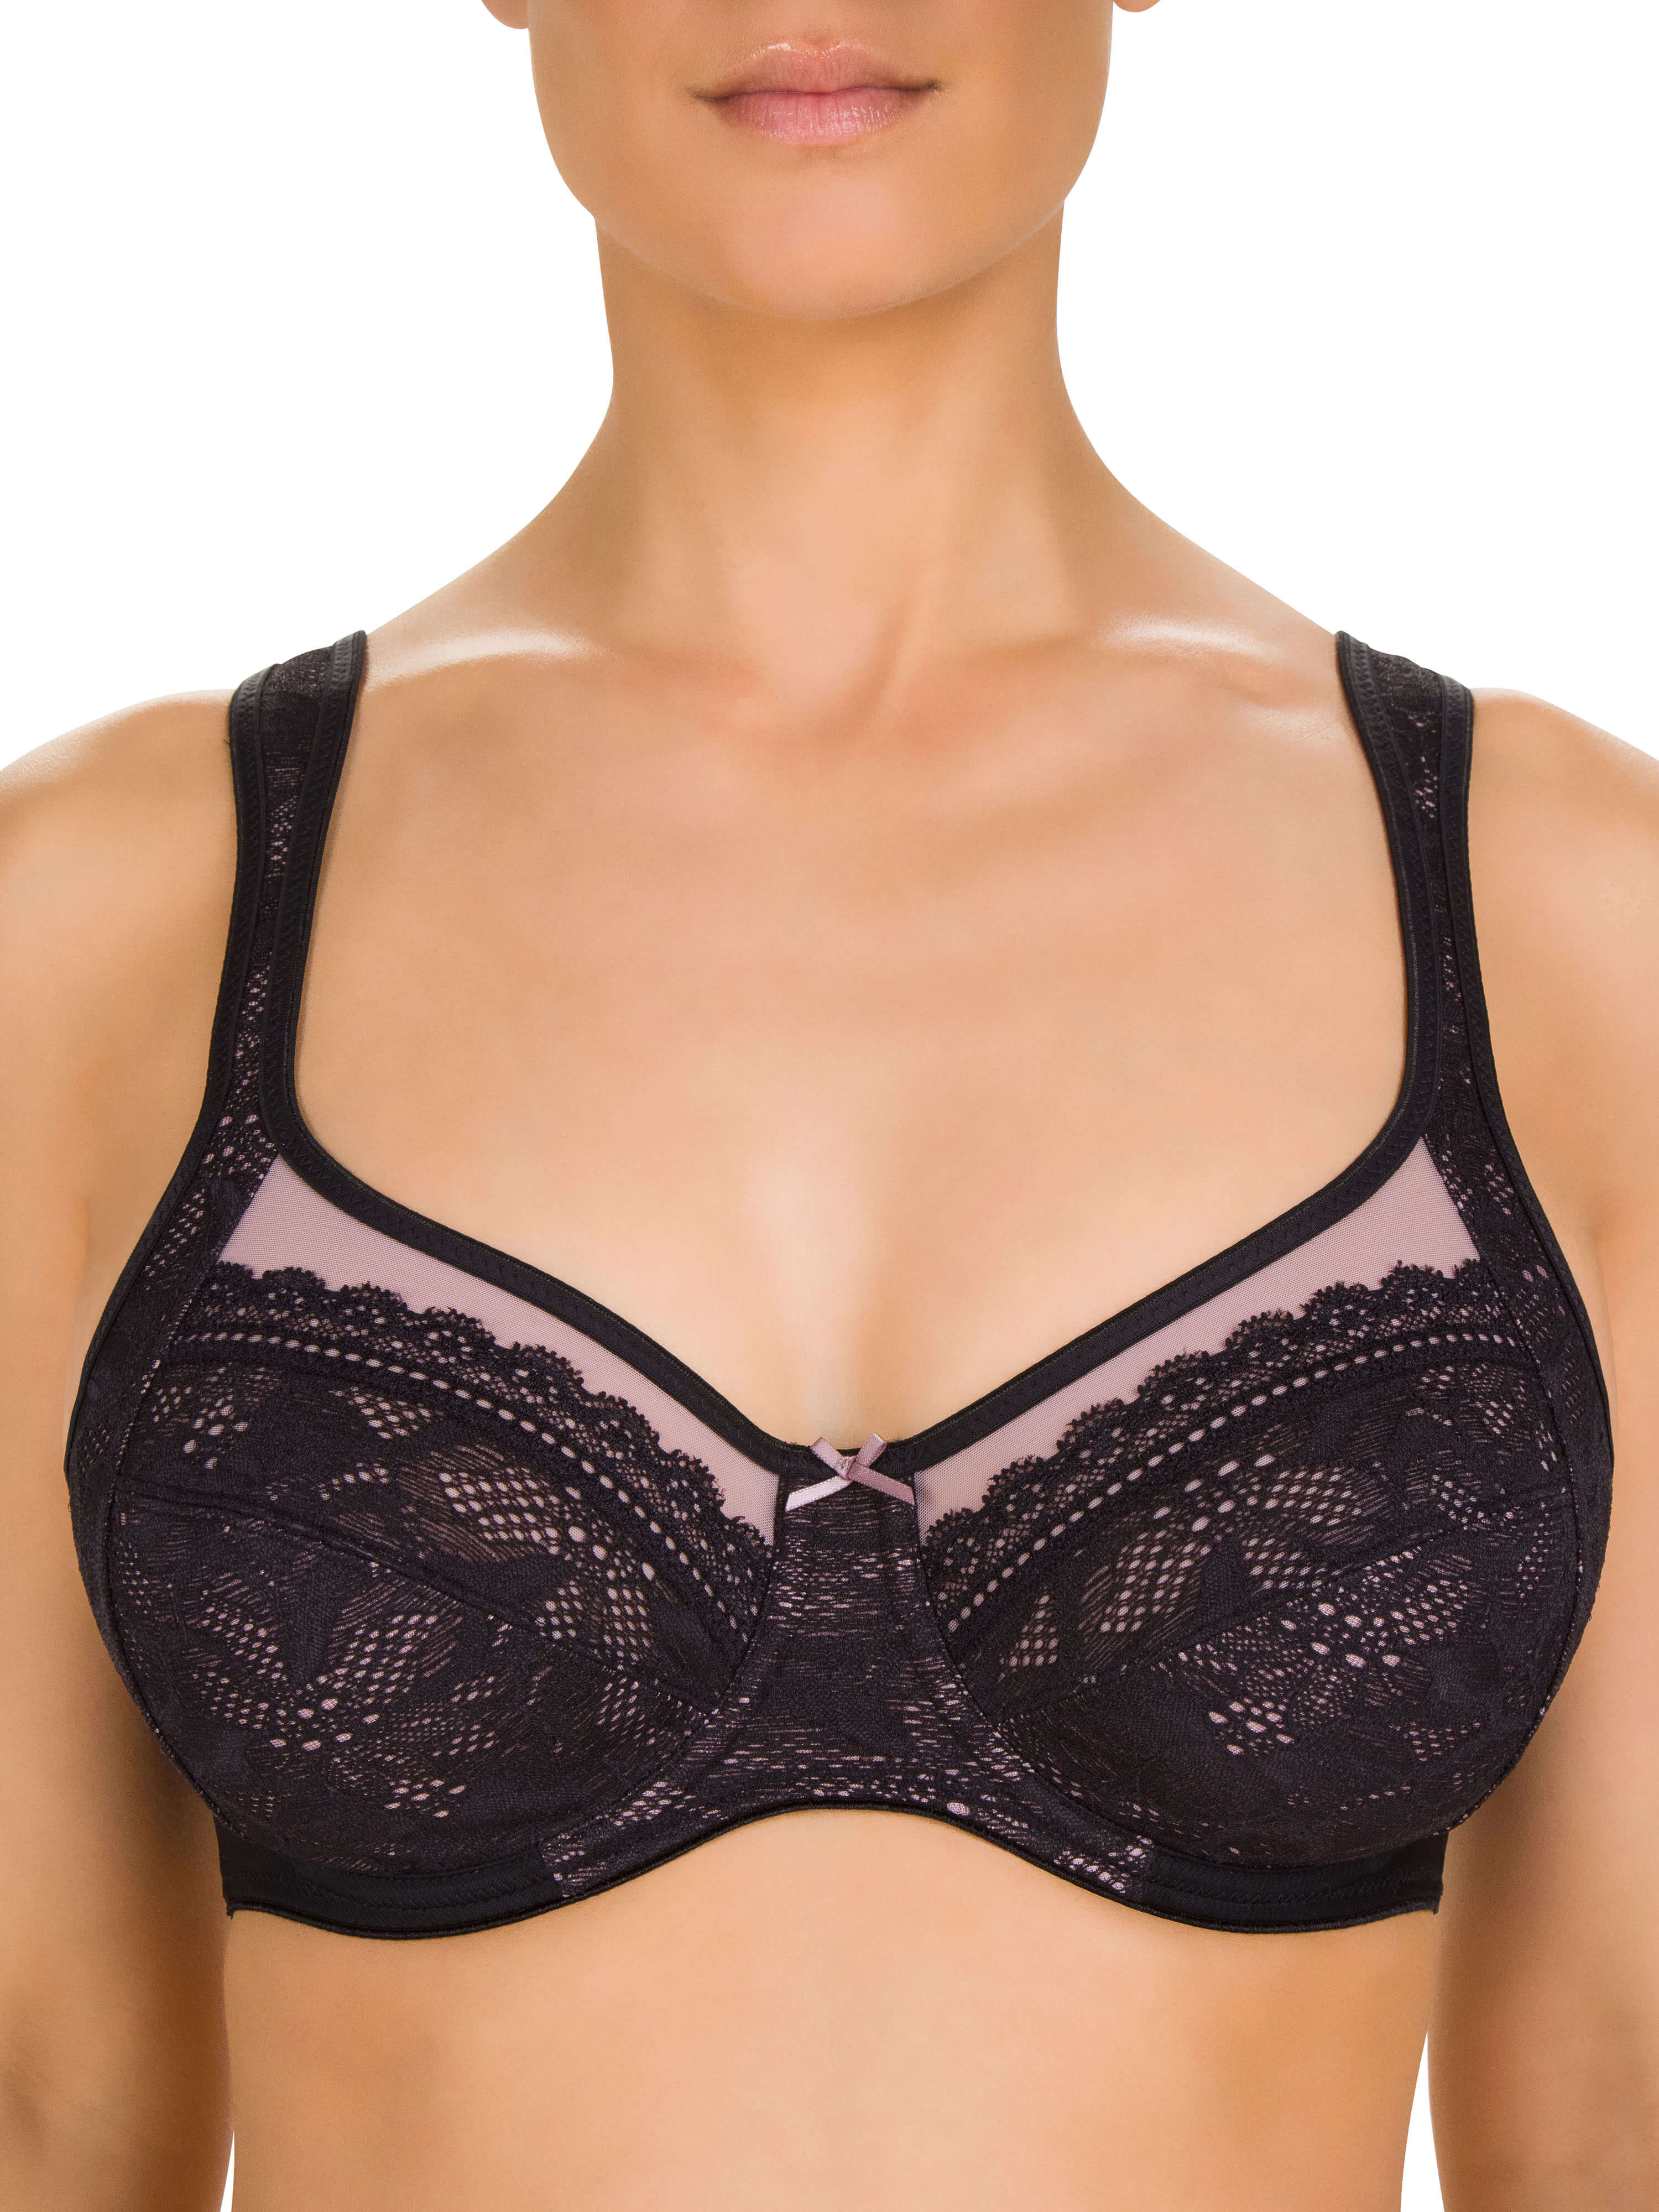 Felina 202289 wired molded bra VISION DELUXE mauve